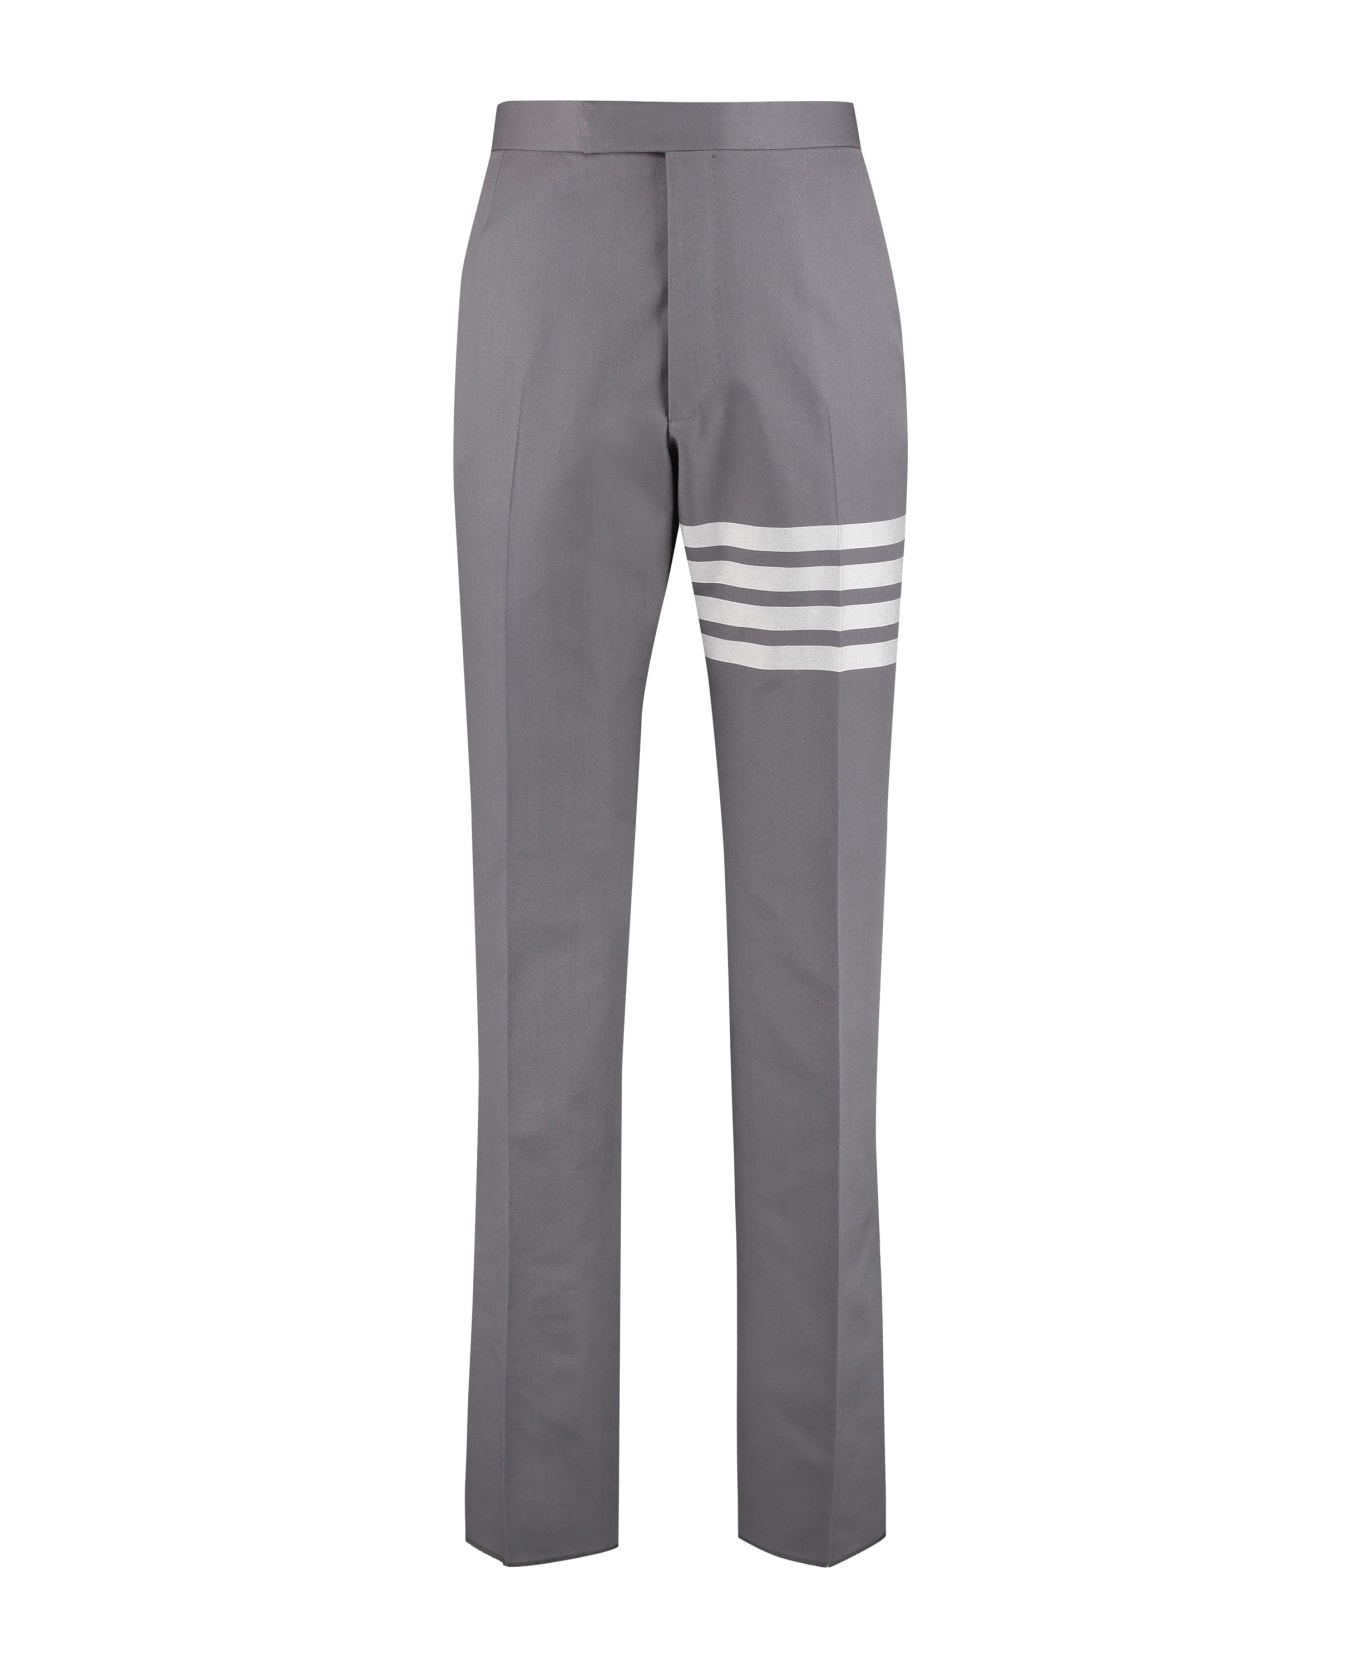 Thom Browne Tailored Trousers - grey